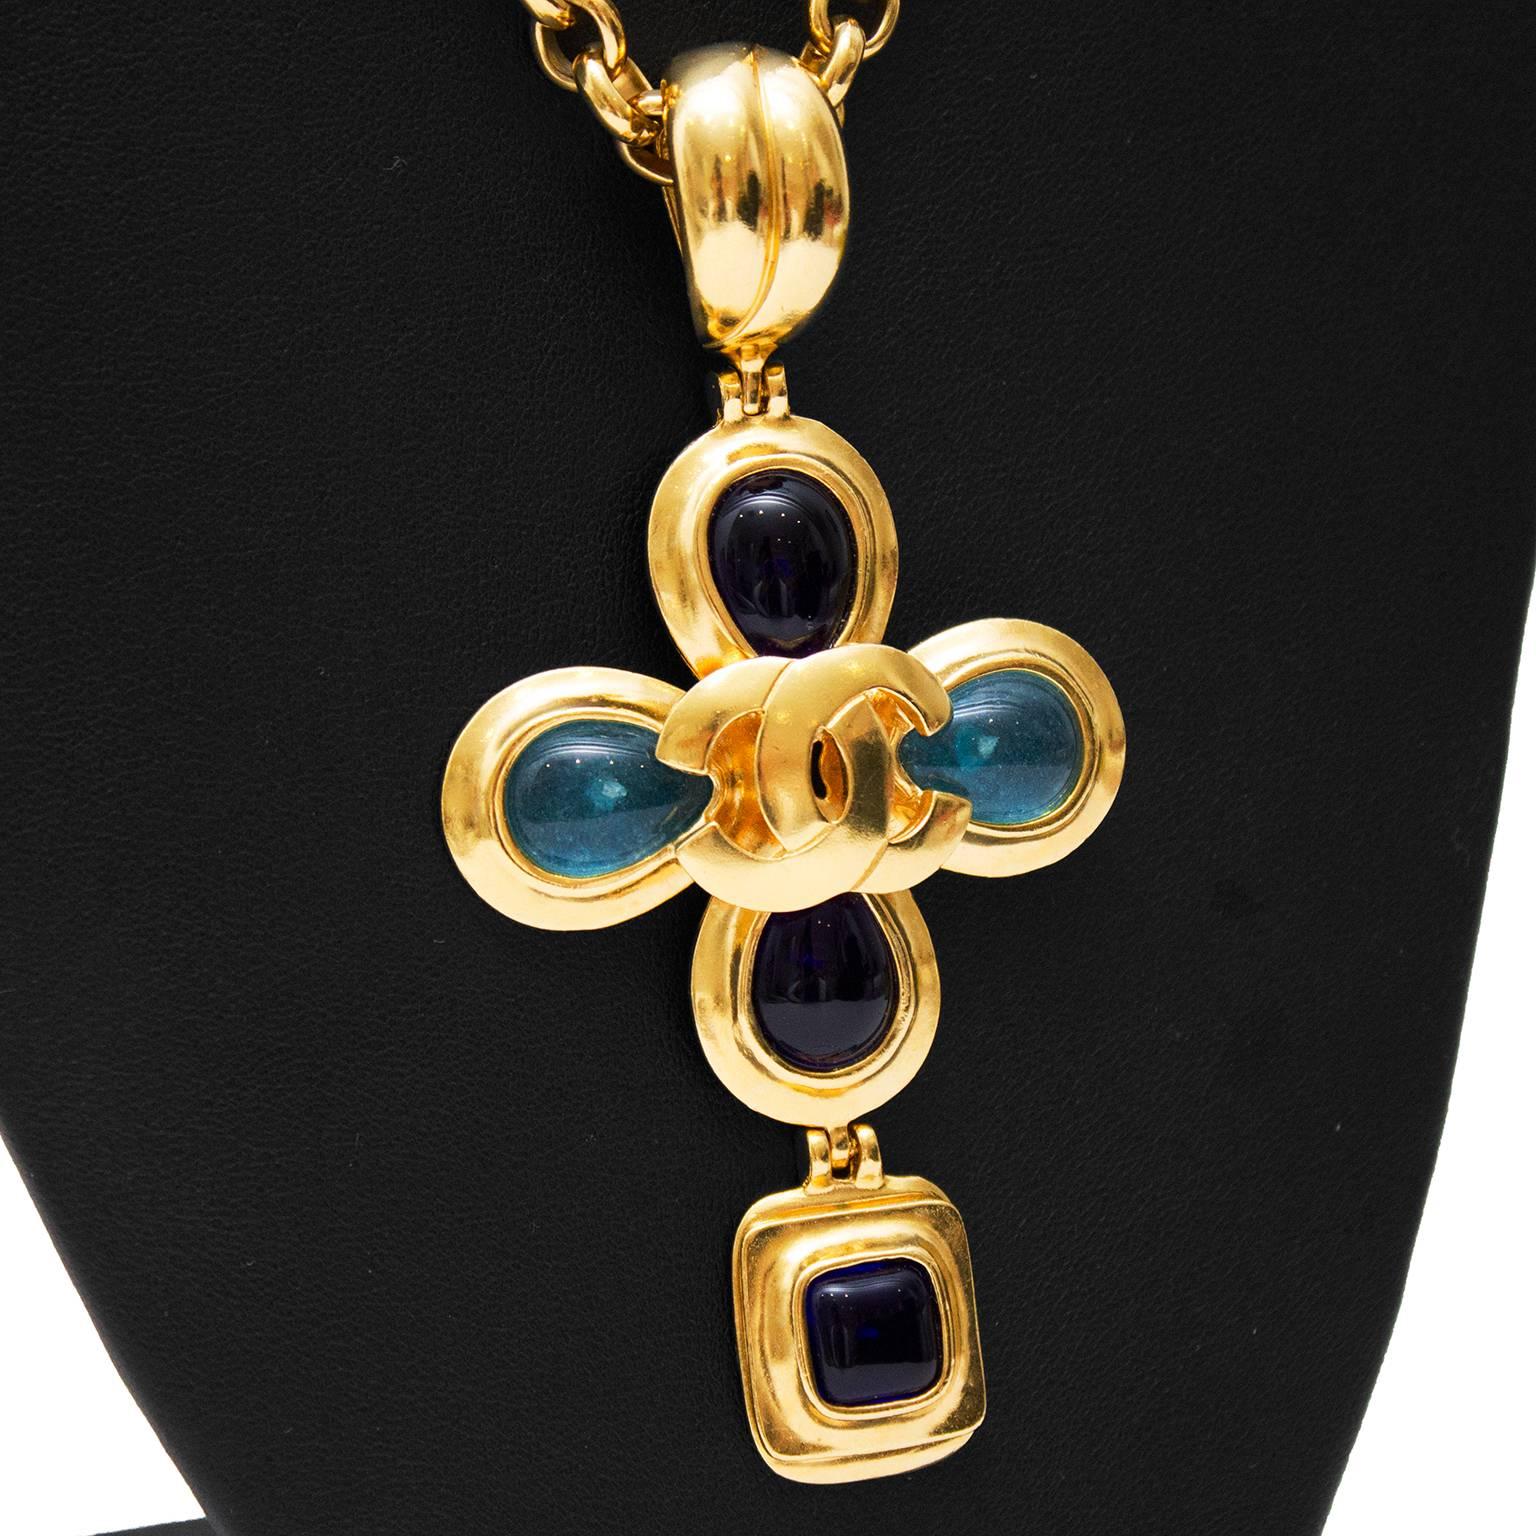 Stunning Chanel necklace from the Autumn 1997 collection. Gold tone chain with large flower pendant with shades of blue poured glass. Hook closure with 2 CC logos on either side. In perfect condition. Comes with Chanel box. 

Length 15” 
Pendent 4”